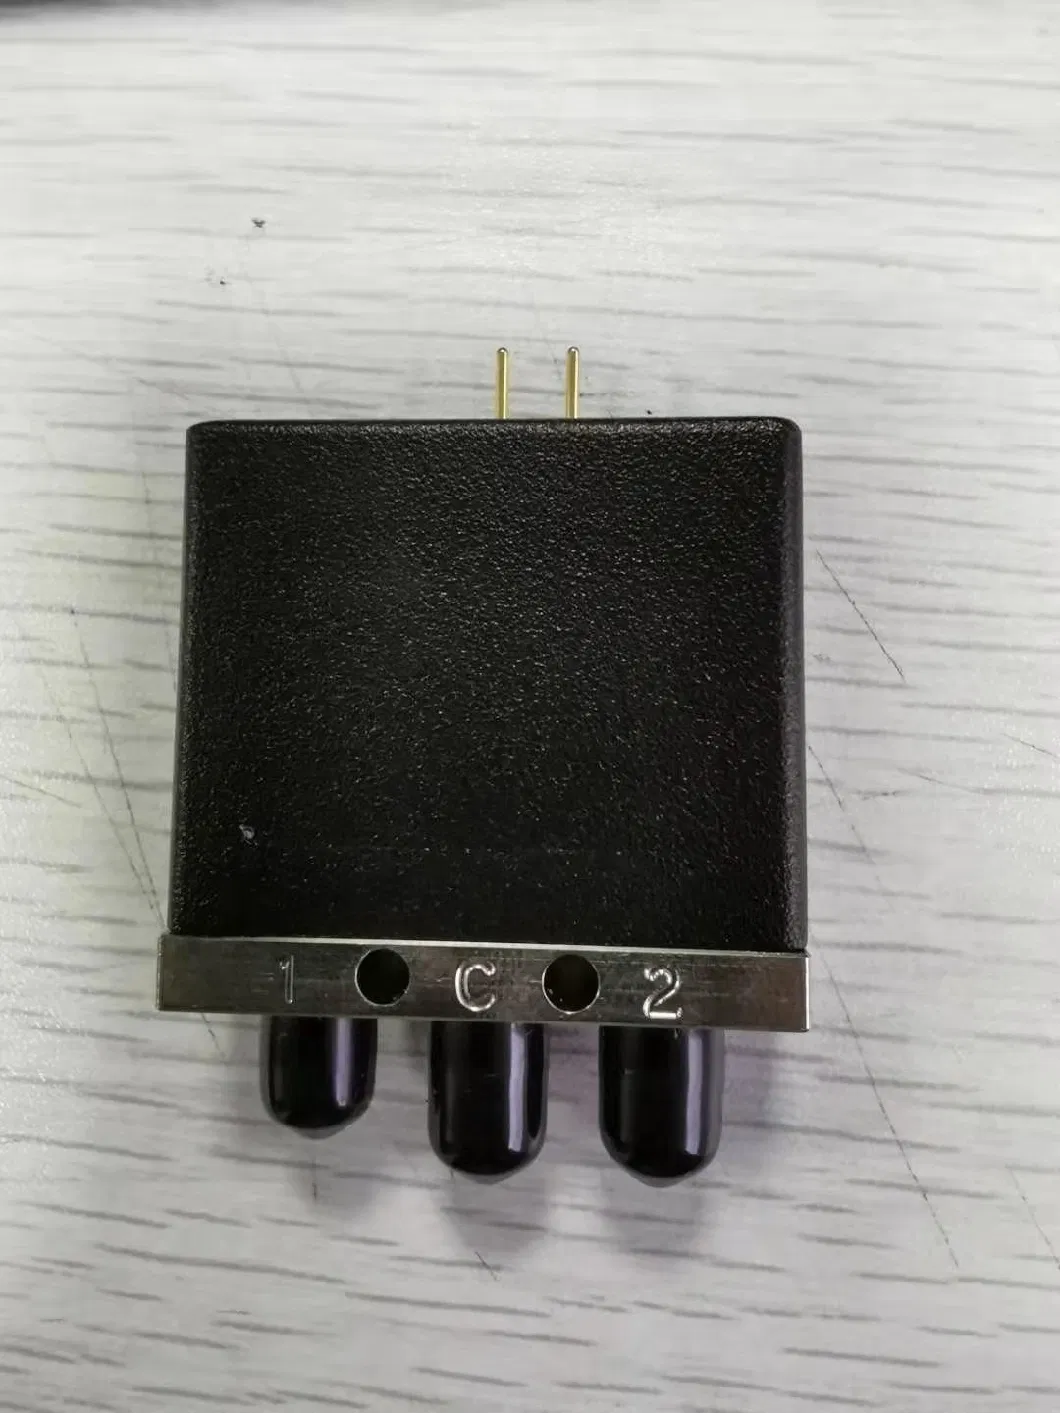 50 Ohm RF Spdt Coxial Switch J720s82210 SMA Connection Latching Type 12V Actuator Voltage with Ttl 2 Solder Pins